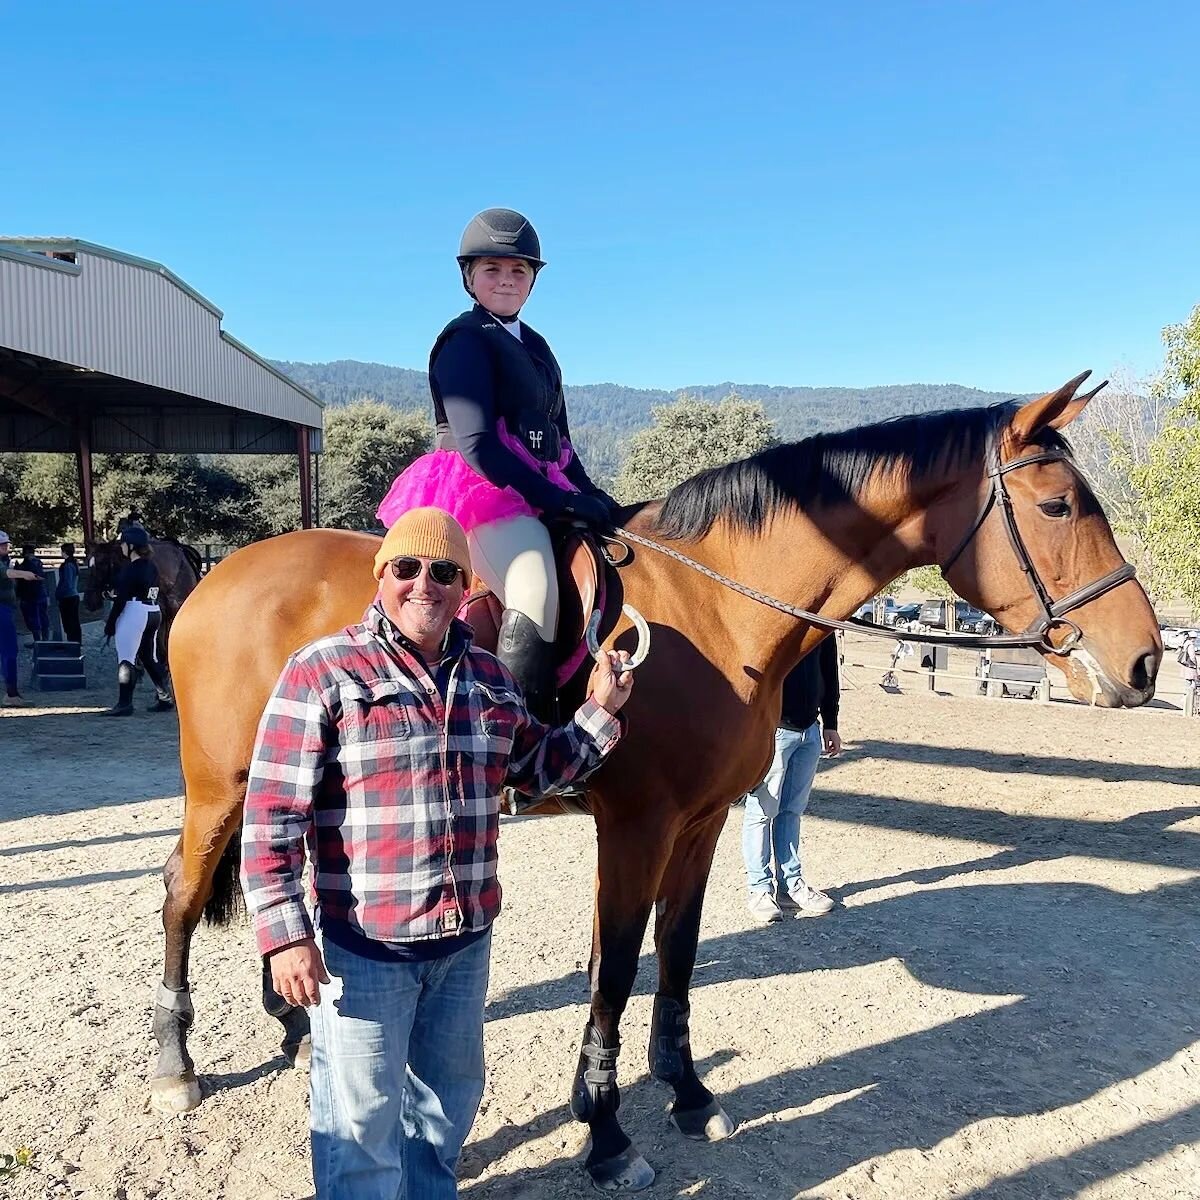 Jillian and Elegance had fantastic rounds but we are the most proud of her retirement from the course after Elle lost a shoe. Jillian is a fantastic horse woman first, even if she might have won she takes the best care of her horse. 

.

.

.

#hunte